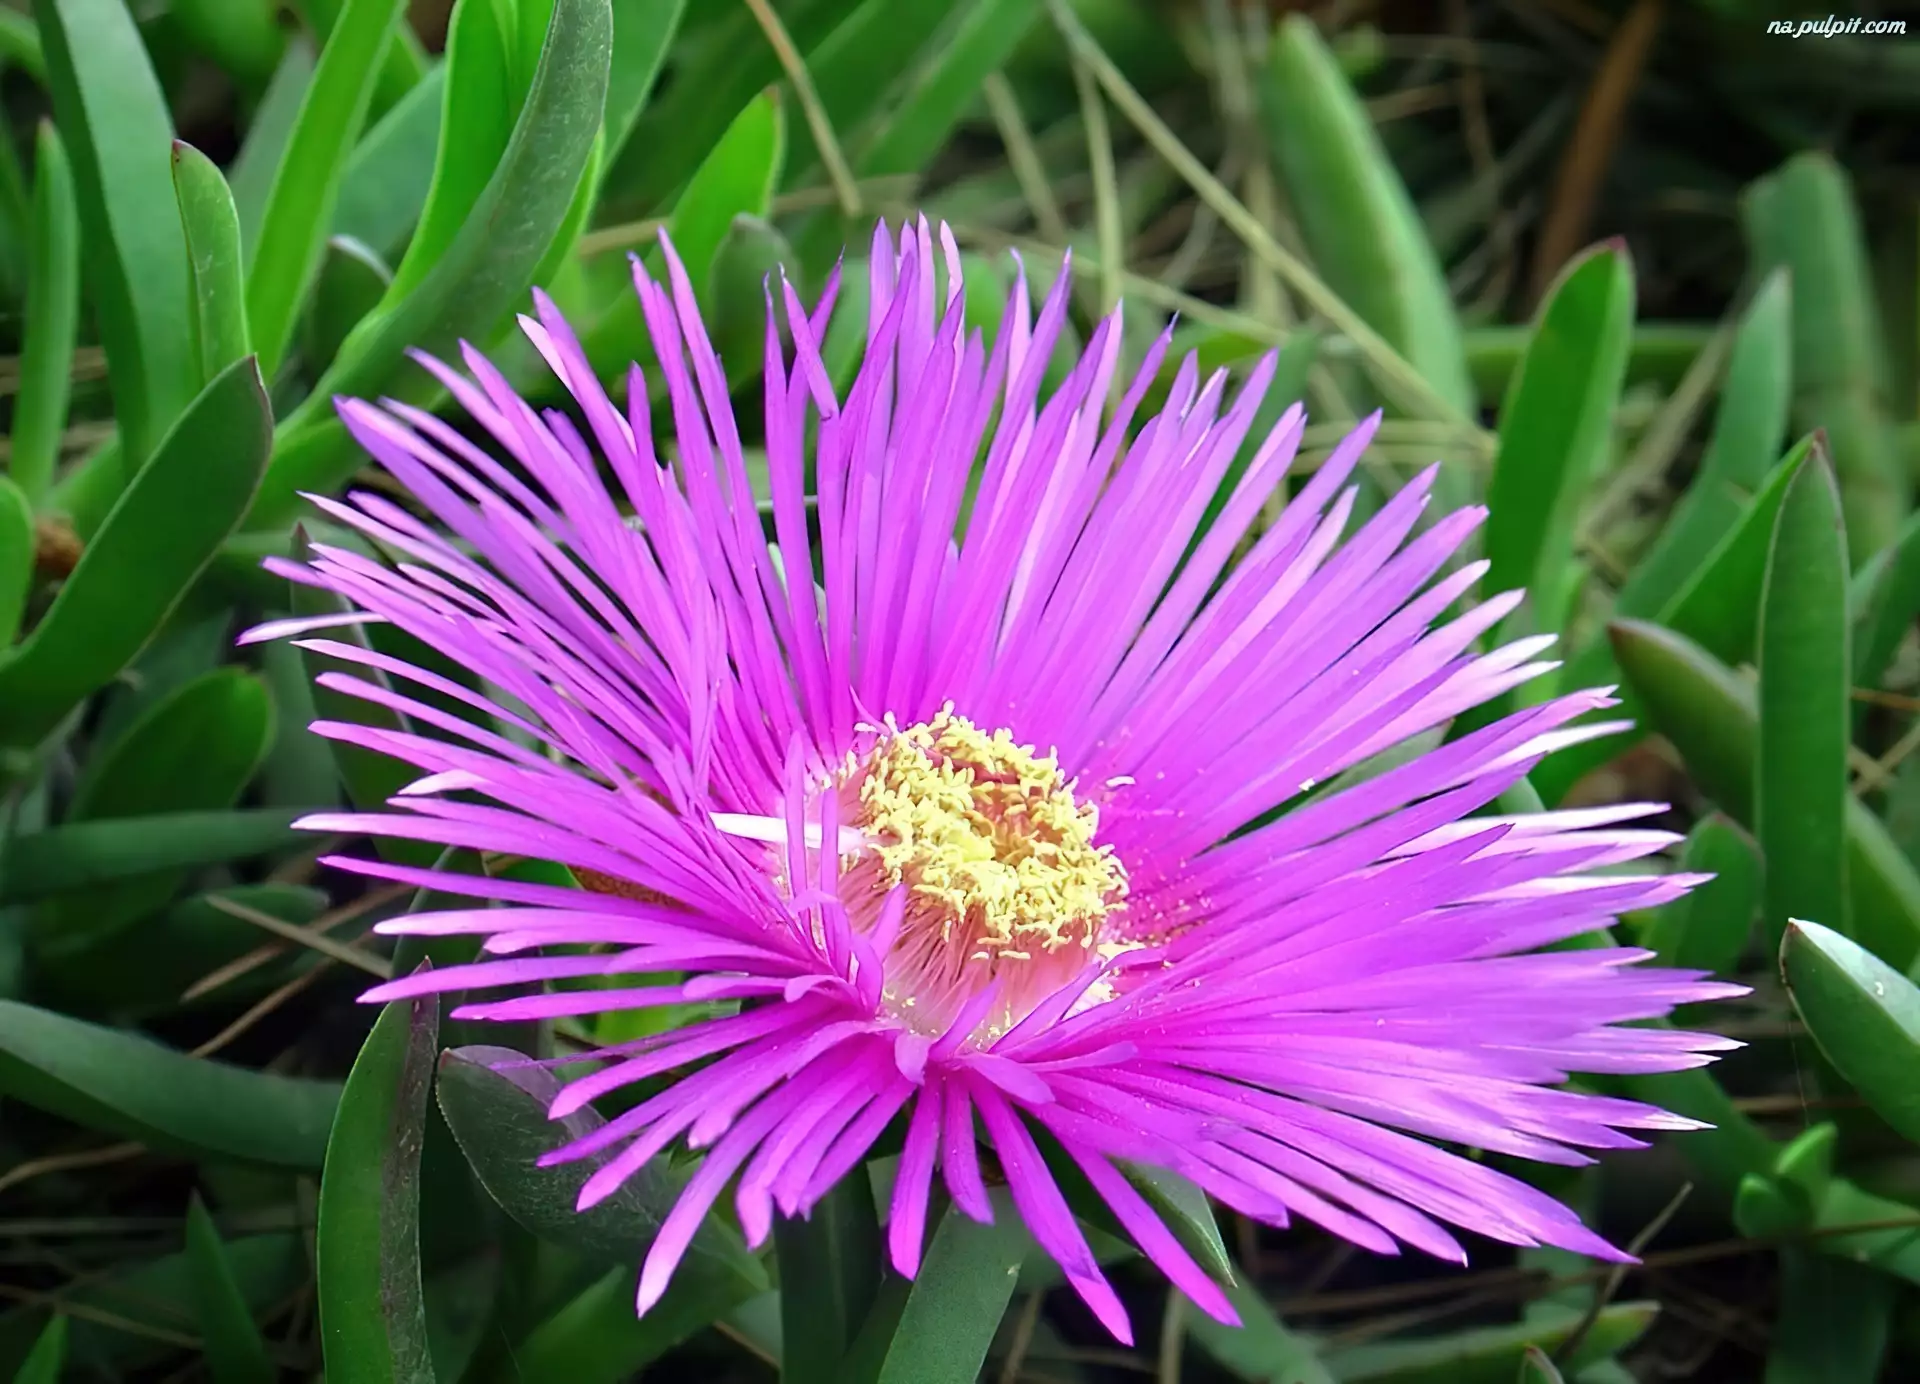 Aster, Fioletowy